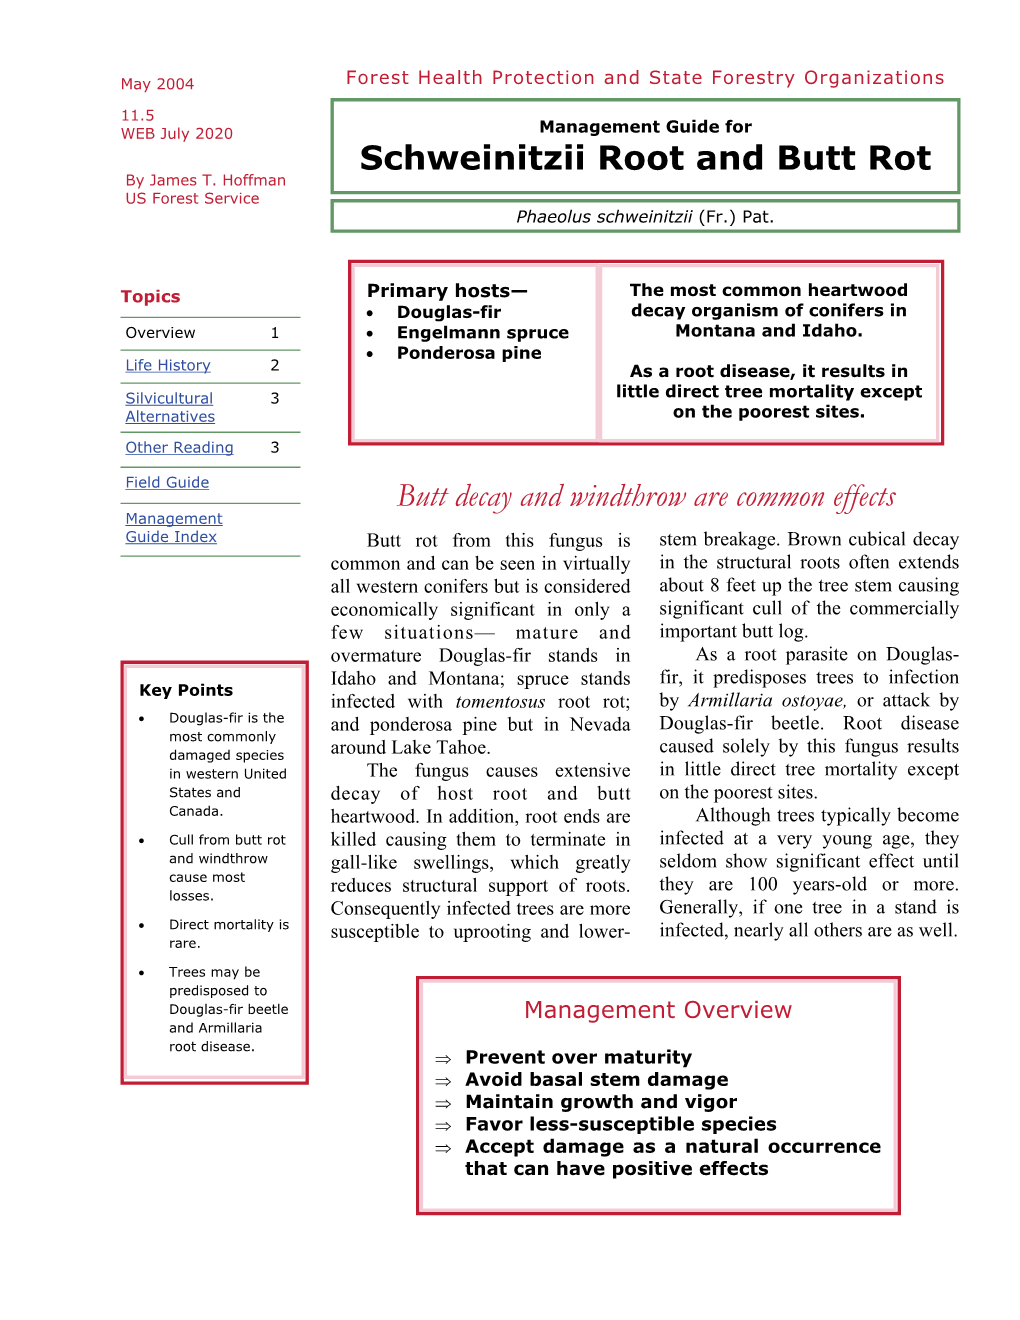 Management Guide for Schweinitzii Root and Butt Rot by James T